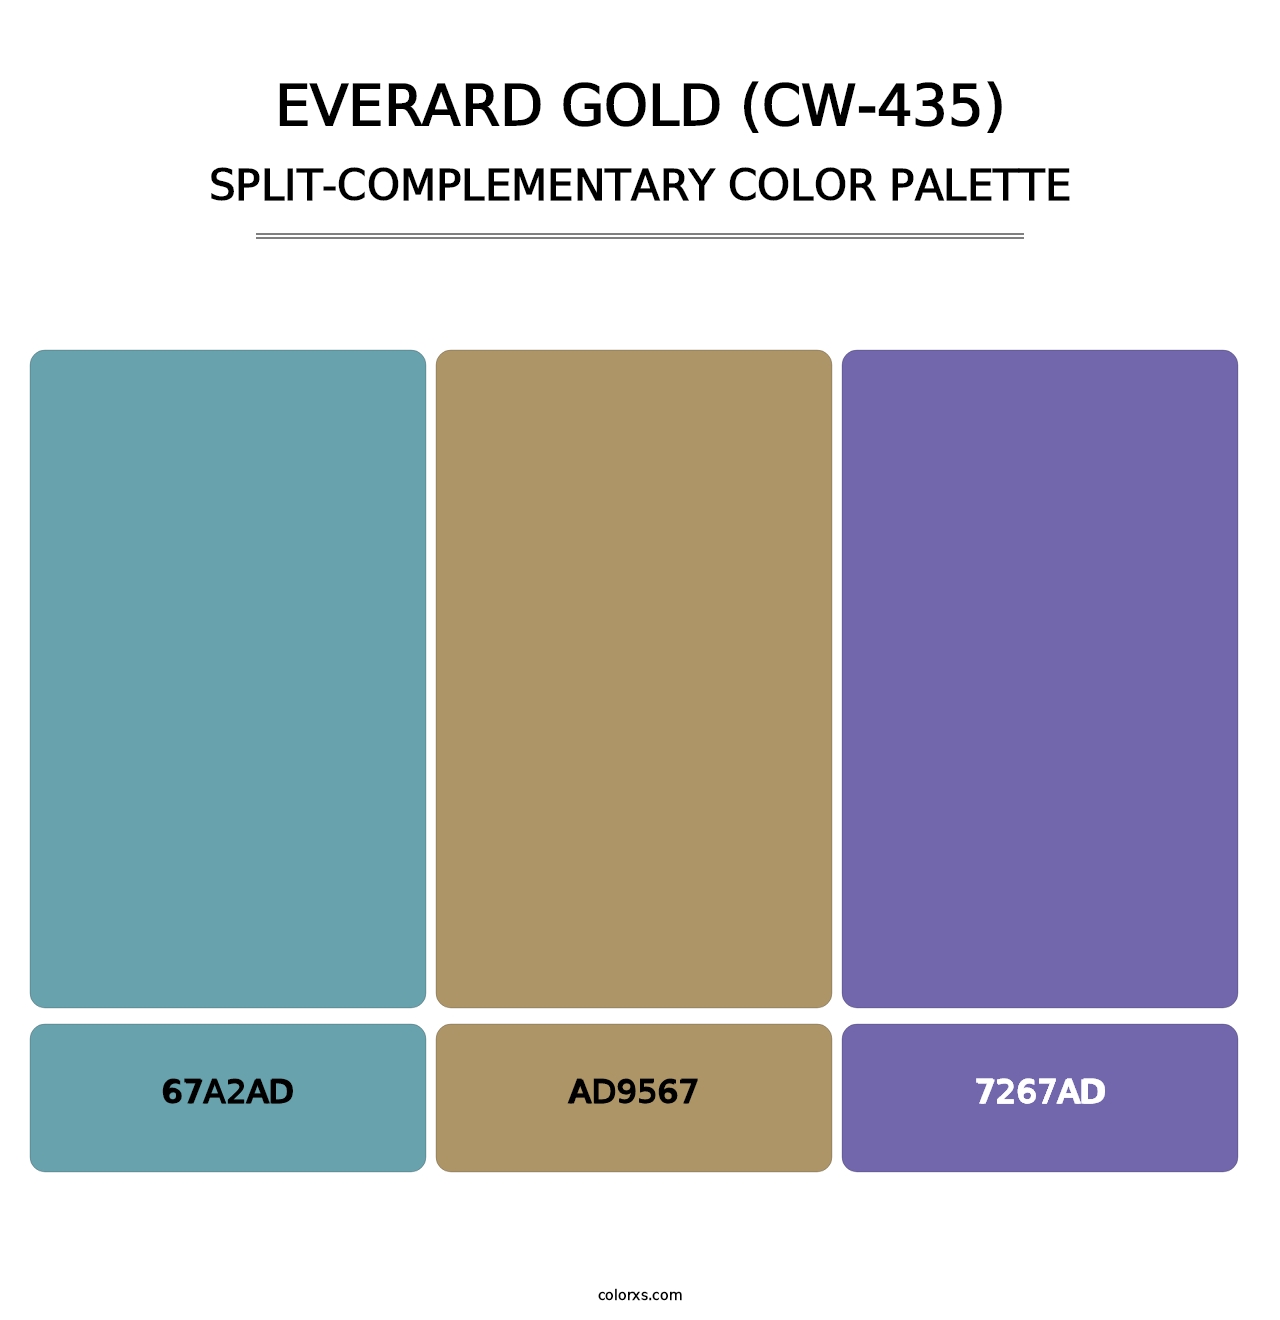 Everard Gold (CW-435) - Split-Complementary Color Palette